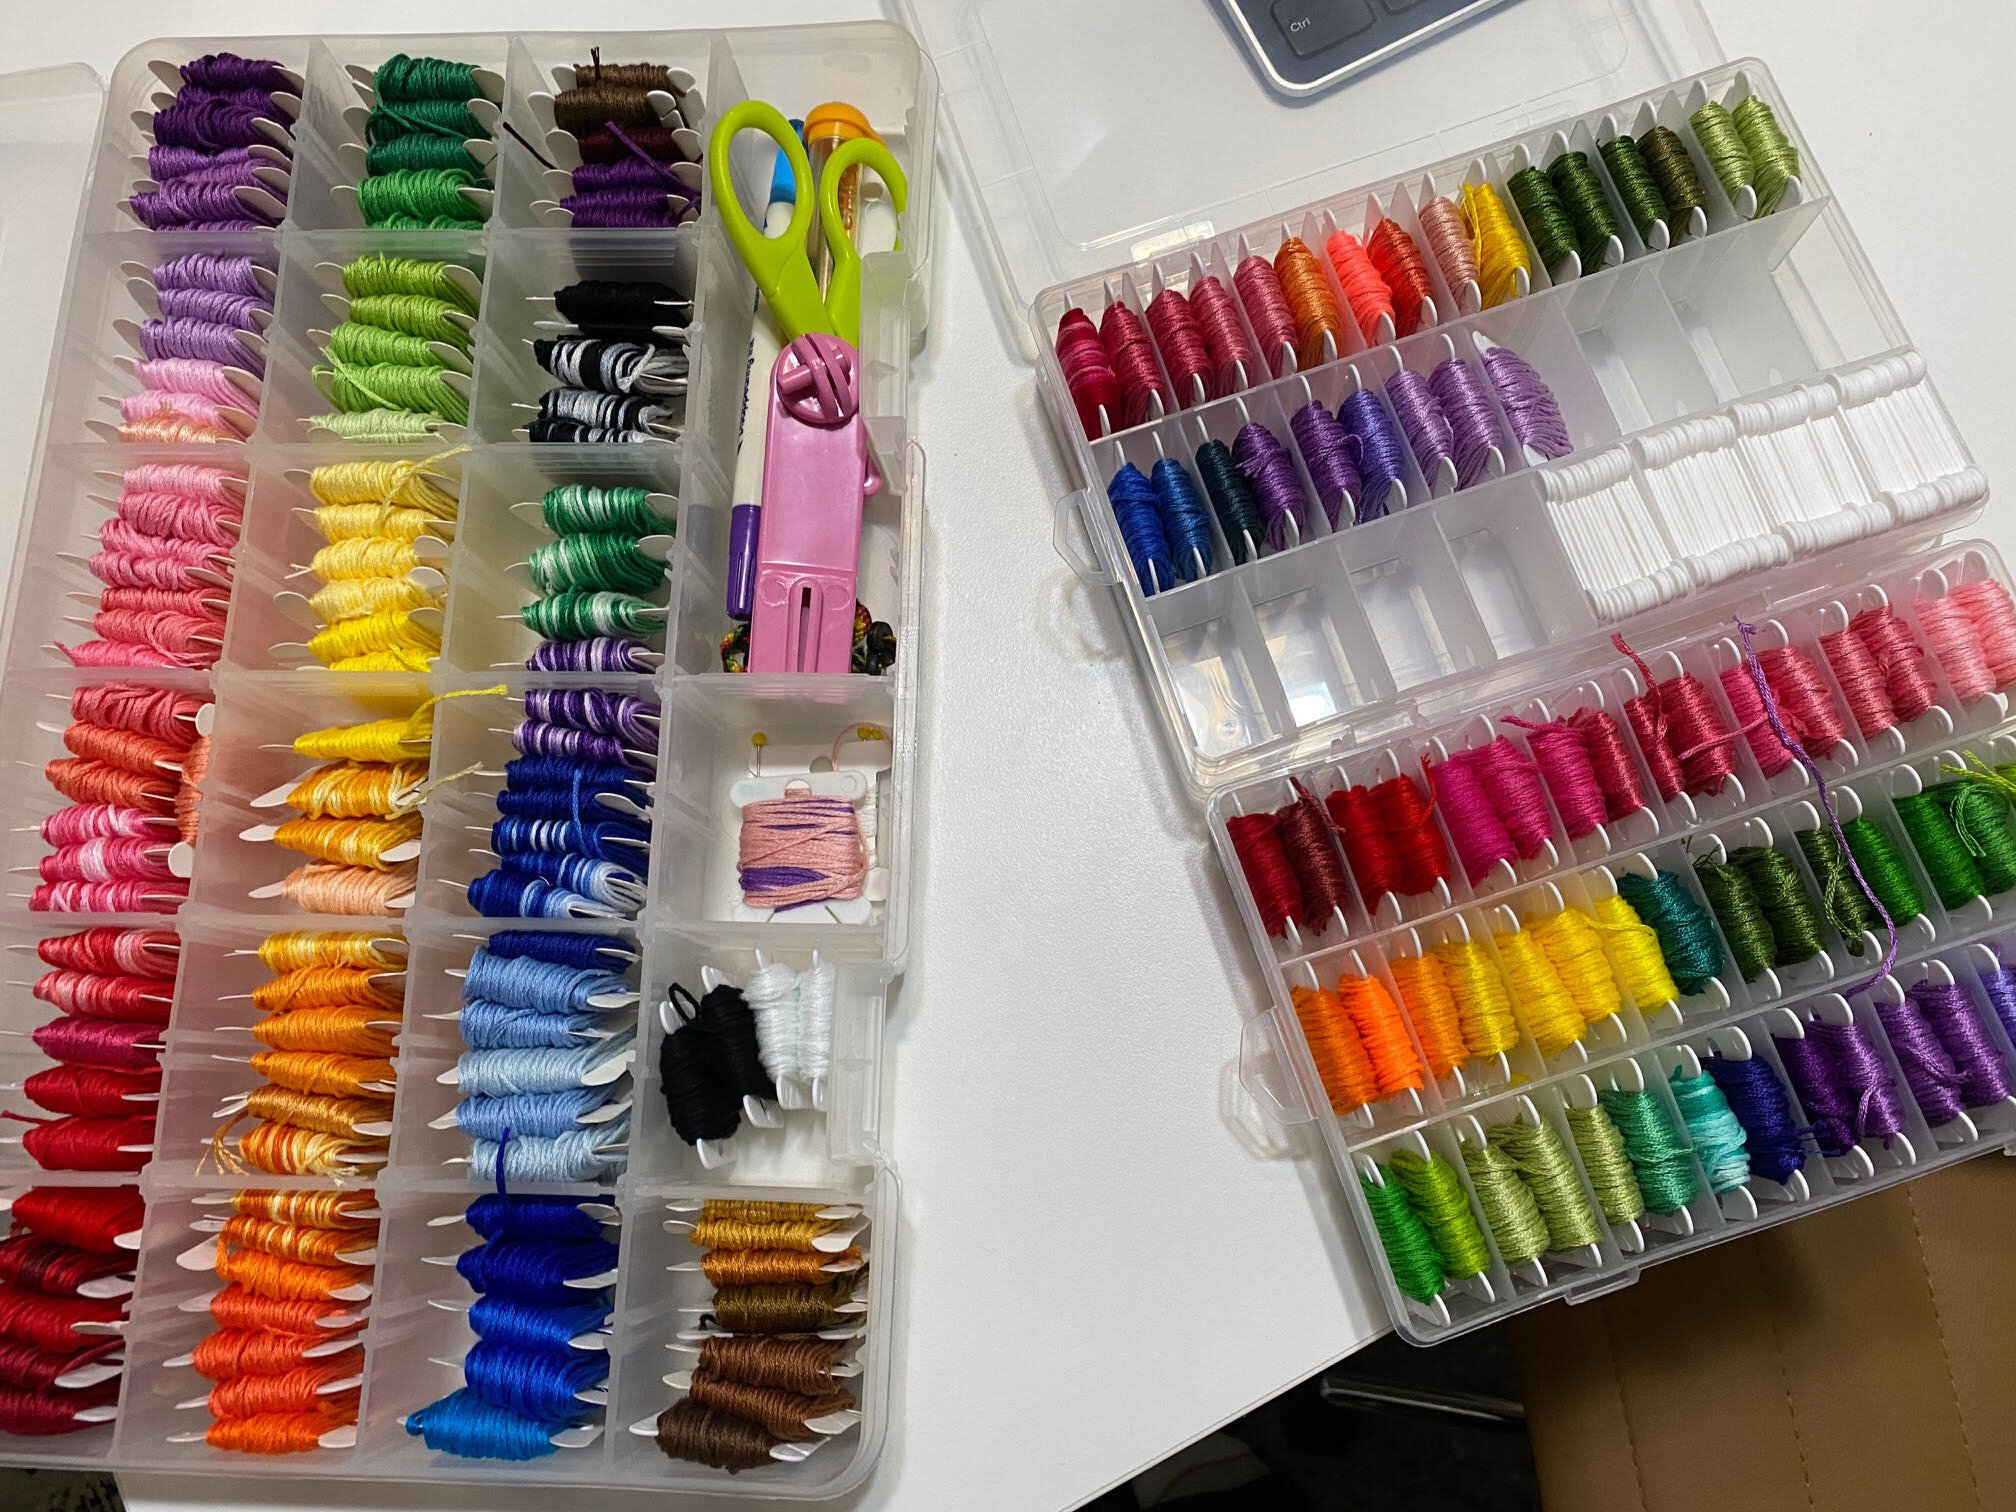 Things (embroidery floss) organized neatly.